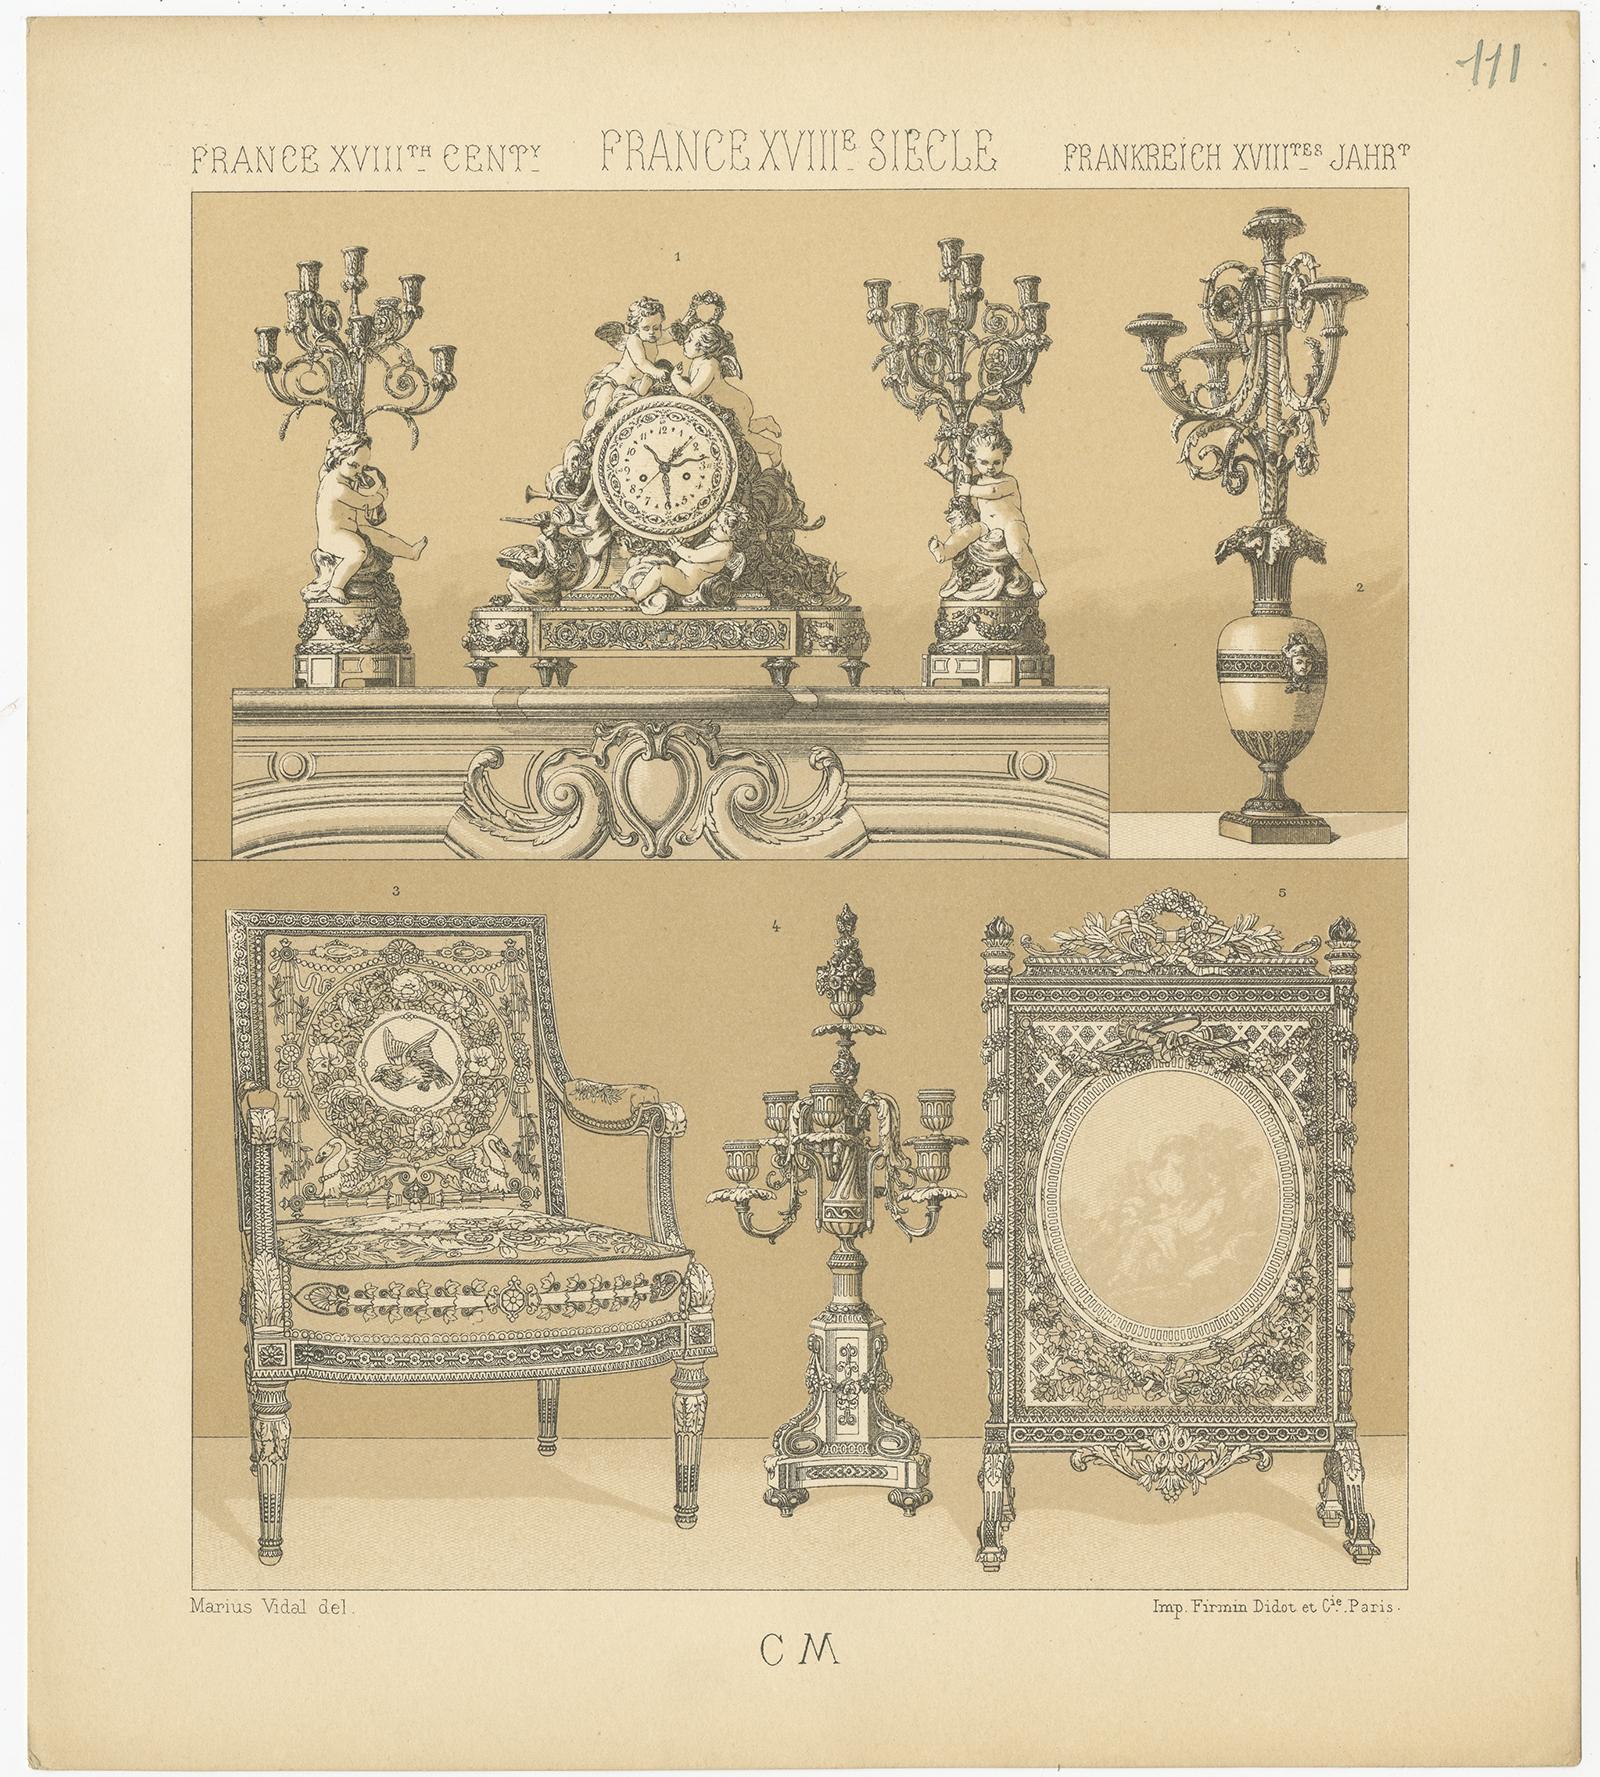 Antique print titled 'France XVIIIth Cent - France XVIIIe, Siecle - Frankreich XVIIItes Jahr'. Chromolithograph of French 18th century decorative. This print originates from 'Le Costume Historique' by M.A. Racinet. Published, circa 1880.